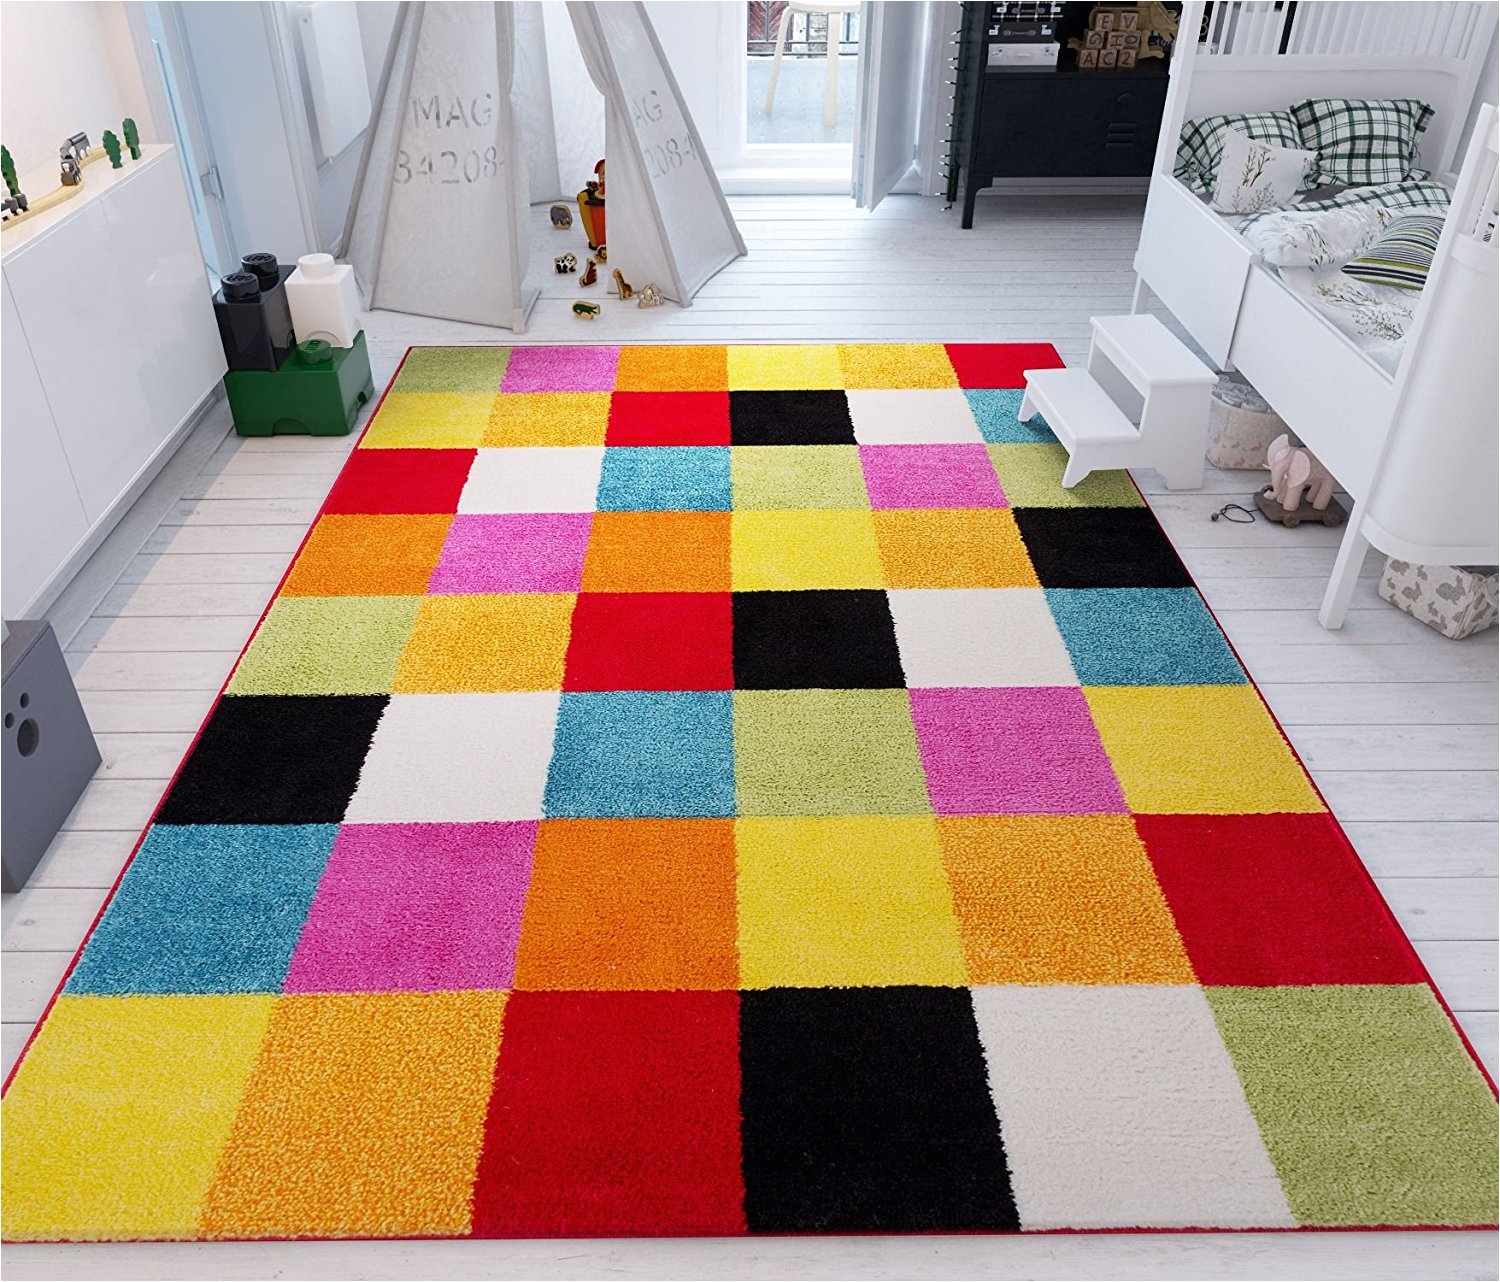 amazon com well woven modern rug squares multi geometric accent 3 3 x 5 area rug entry way bright kids room kitchn bedroom carpet bathroom soft durable